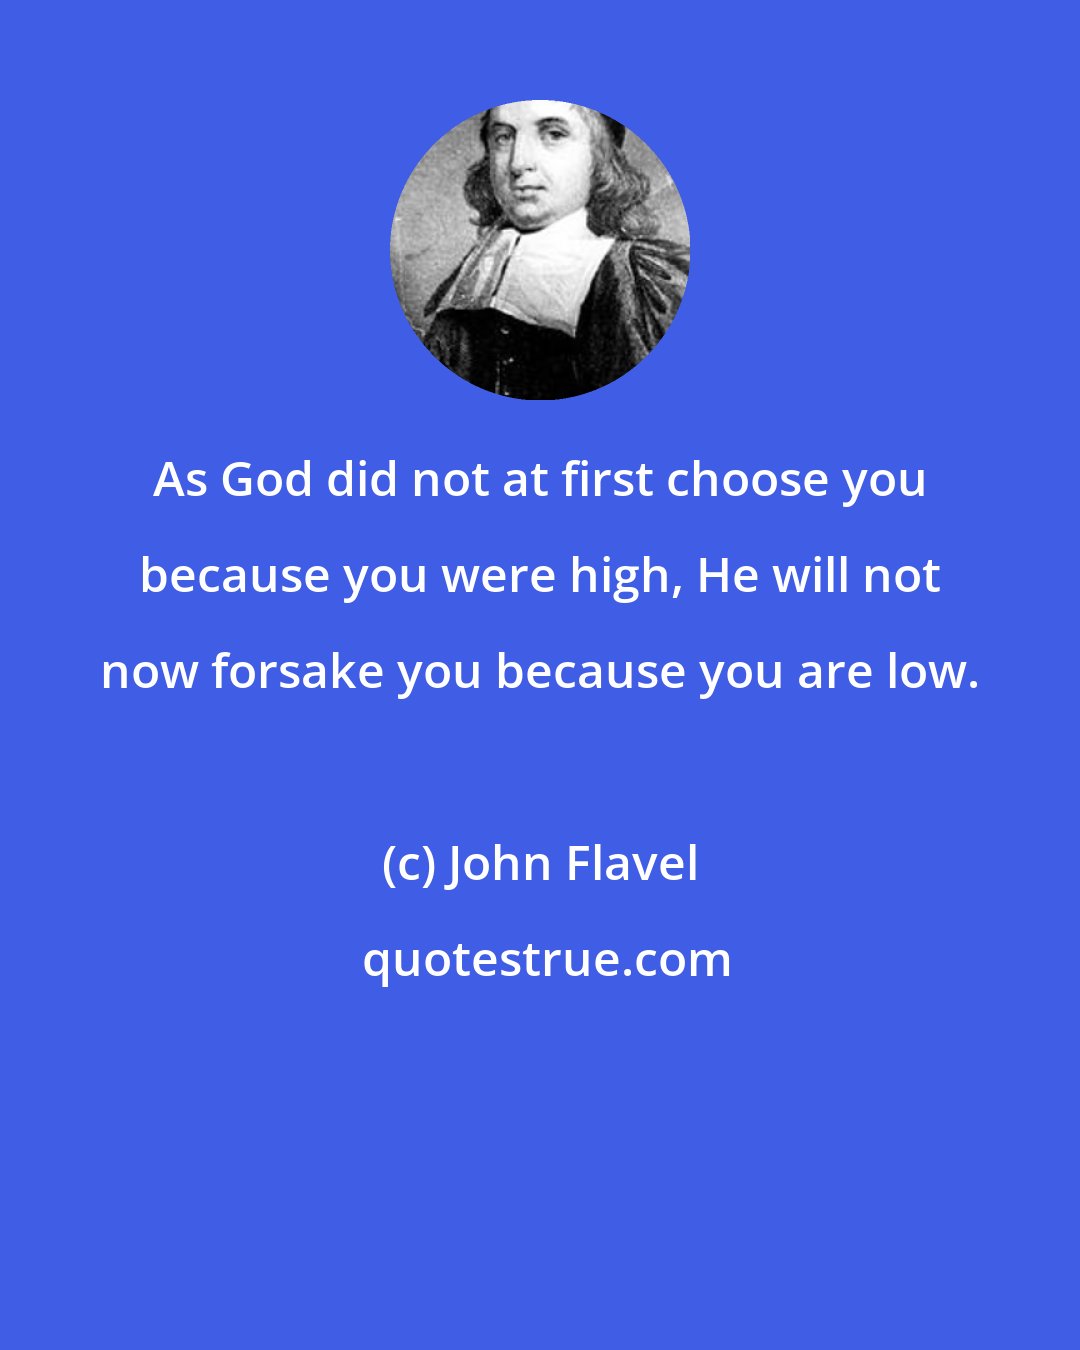 John Flavel: As God did not at first choose you because you were high, He will not now forsake you because you are low.